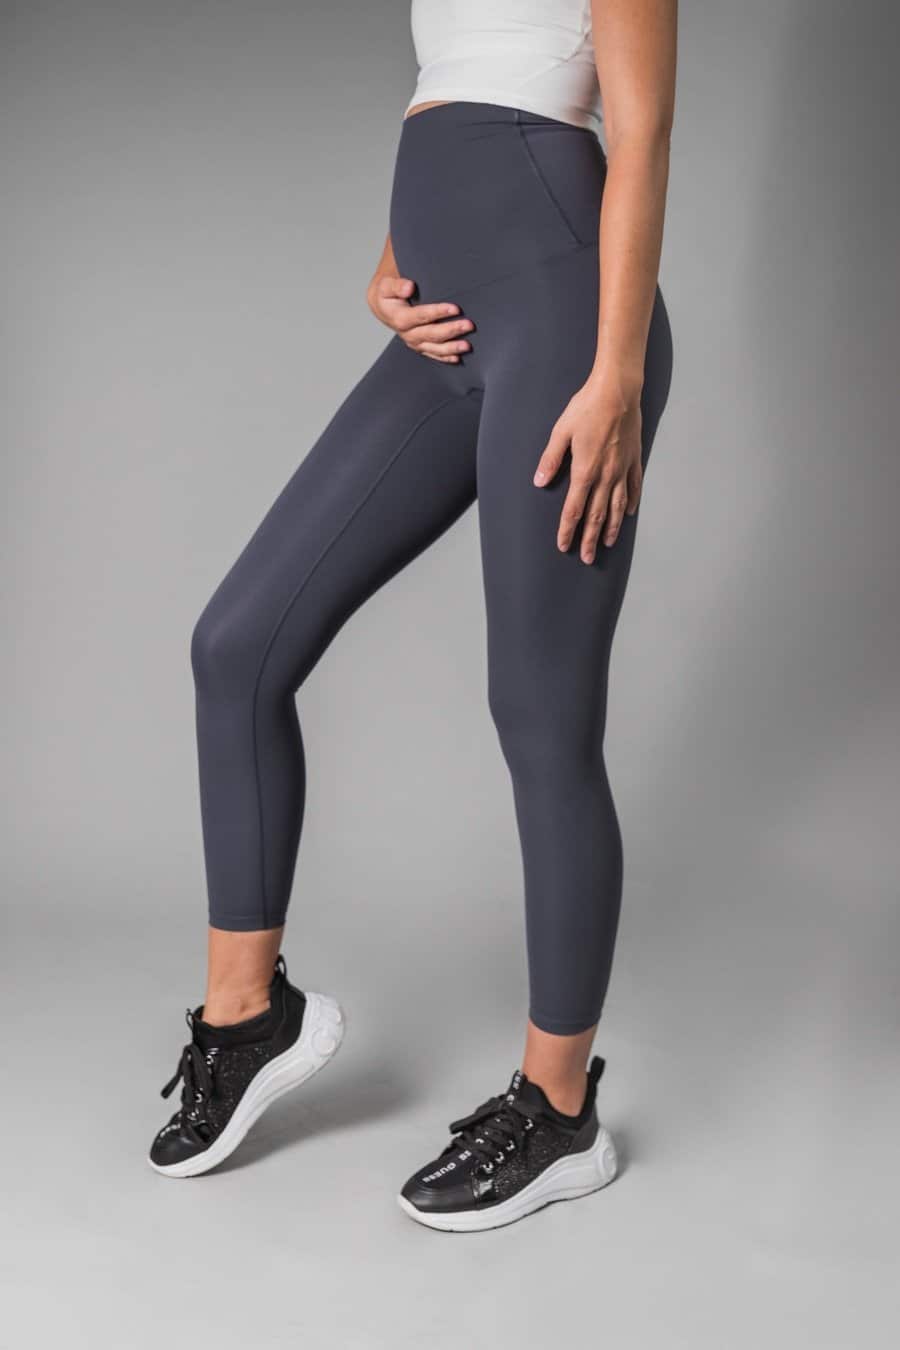 Maternity Support Leggings: Thin, Shark Printed, And Perfect For  Spring/Summer From Mr_wardrobe011, $28.19